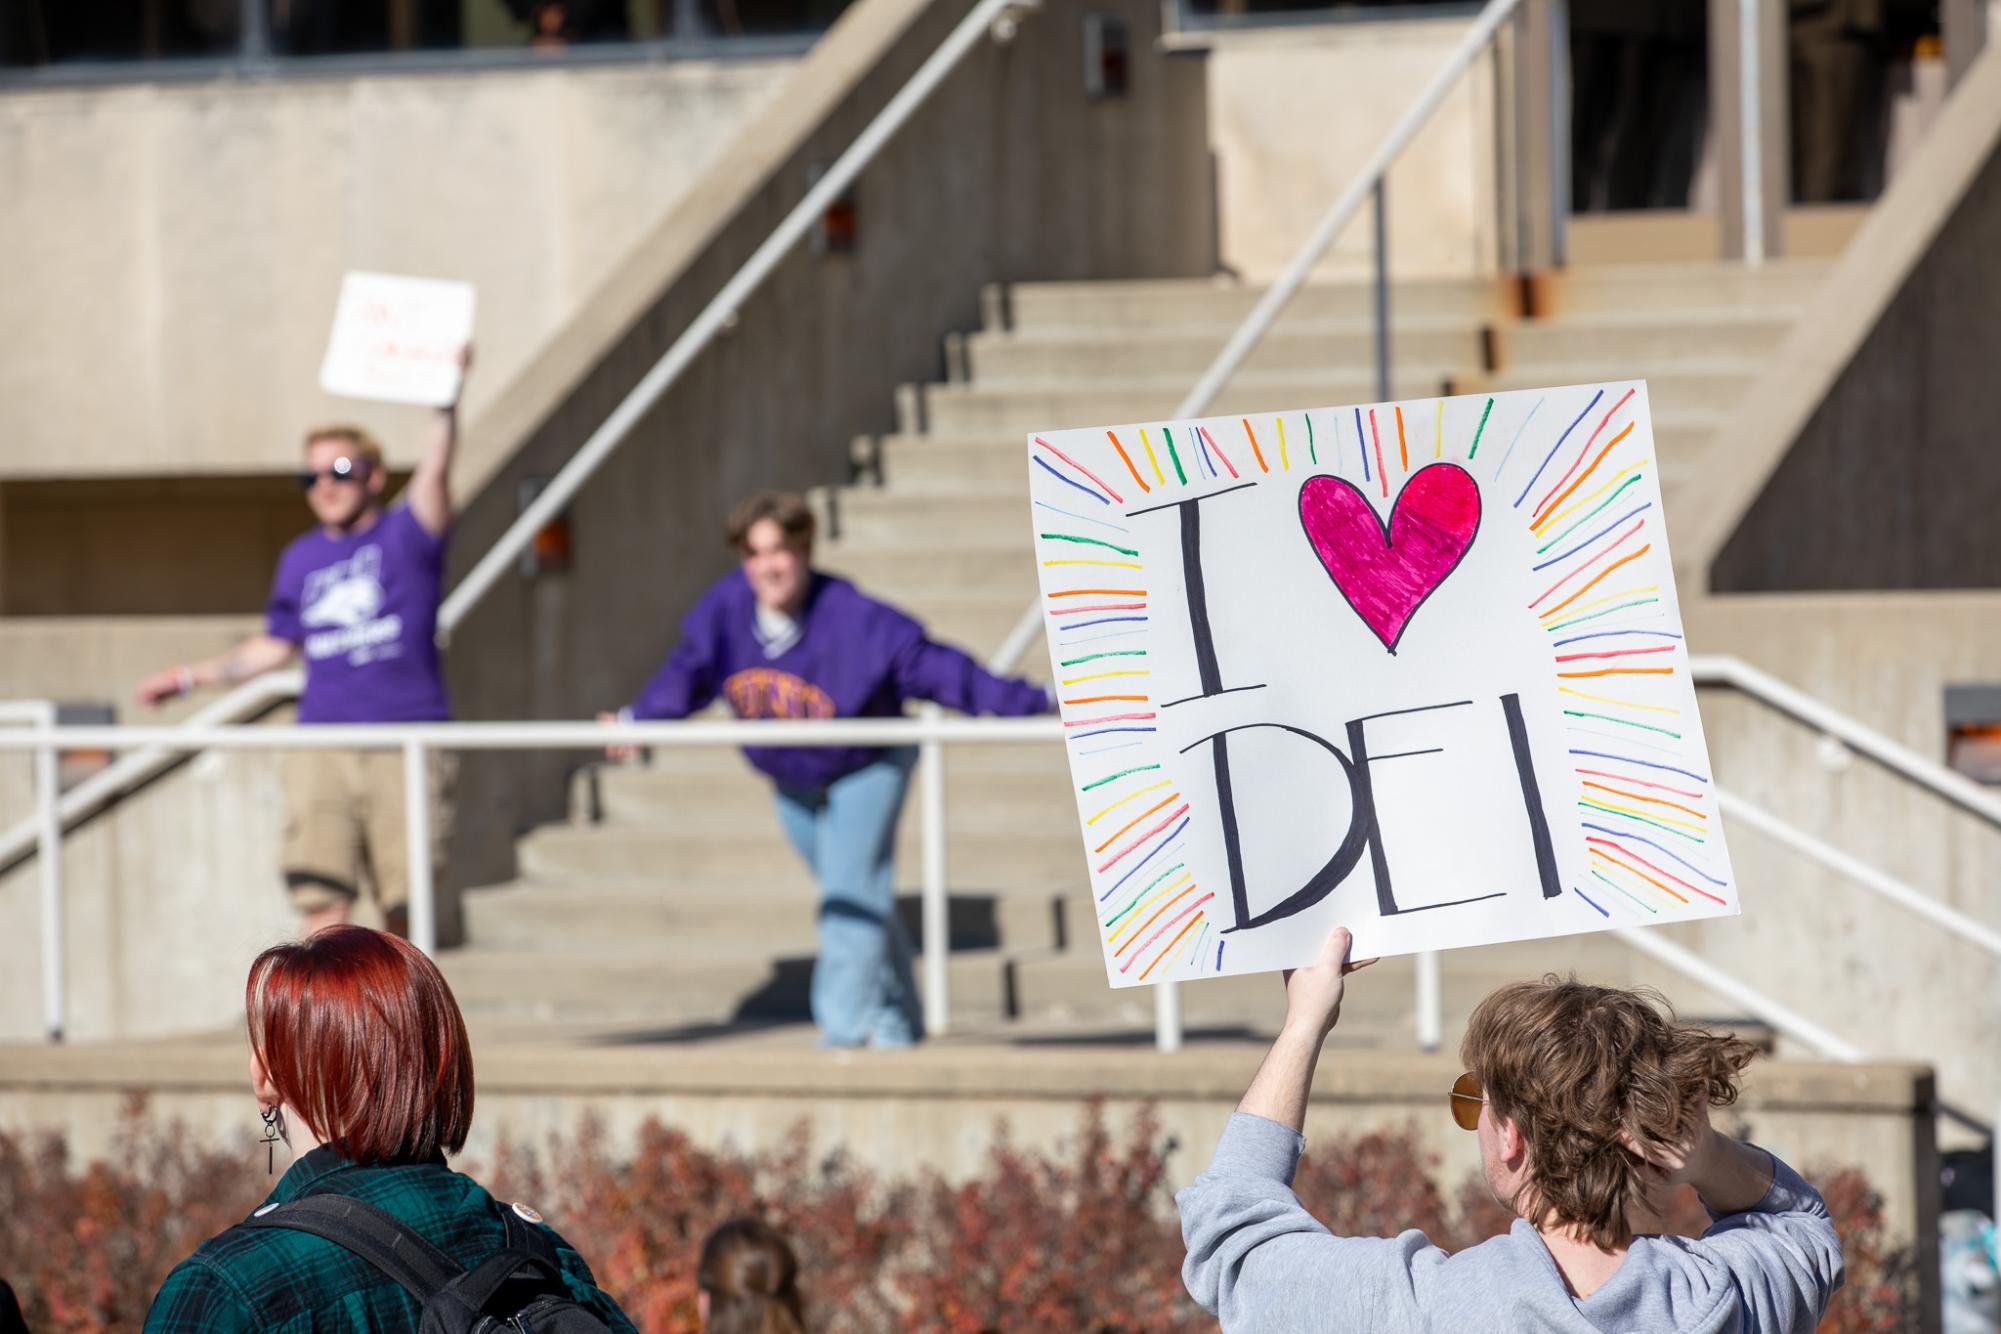 A student holds up a handmade sign in support of Diversity, Equity and Inclusion programs.